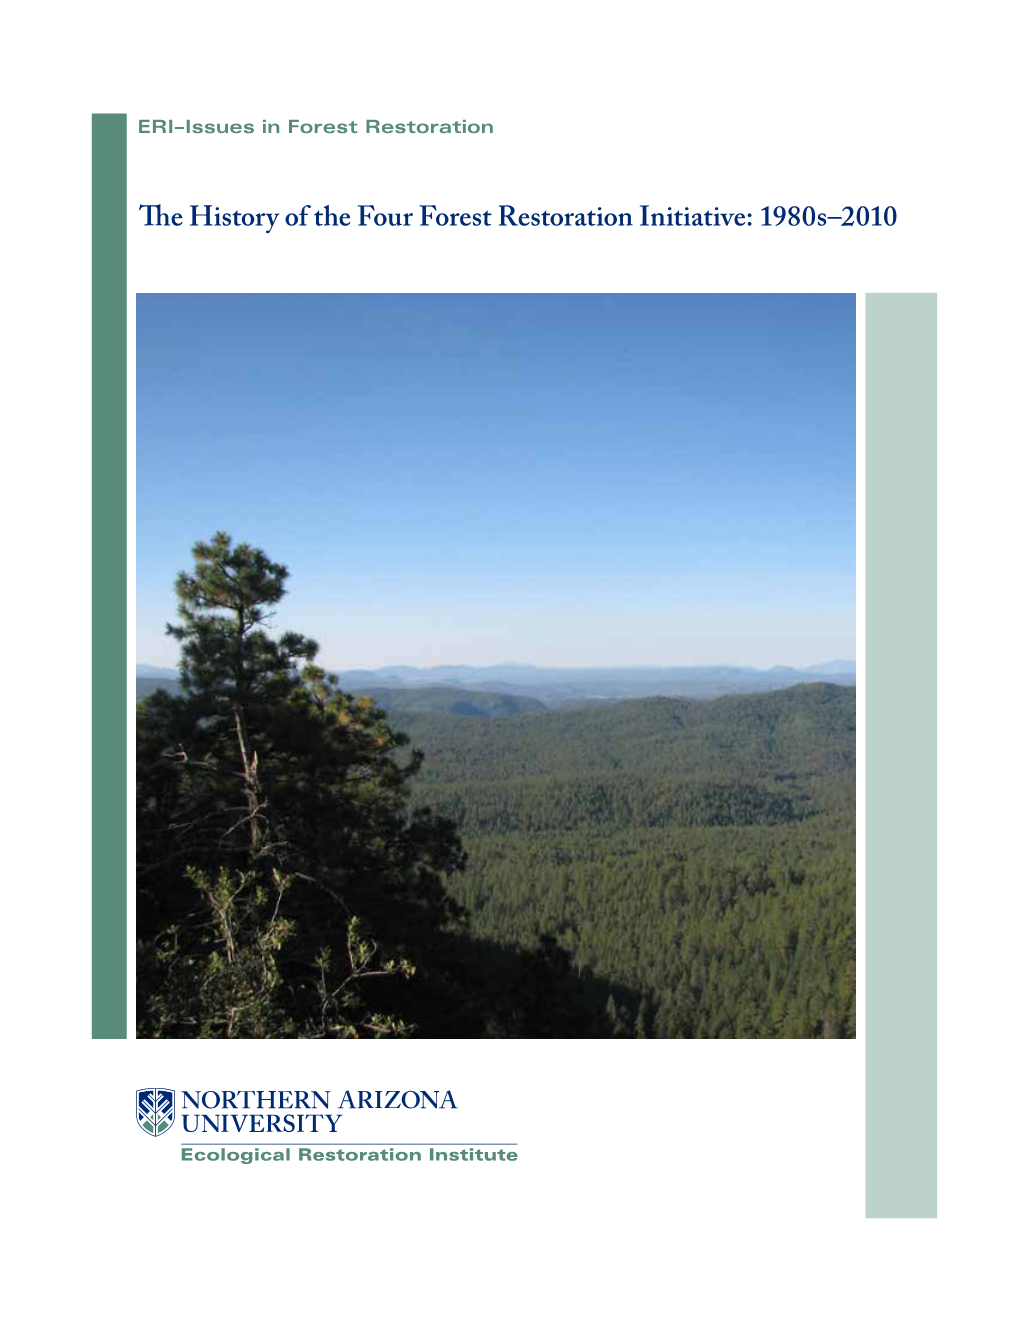 The History of the Four Forest Restoration Initiative: 1980S-2010